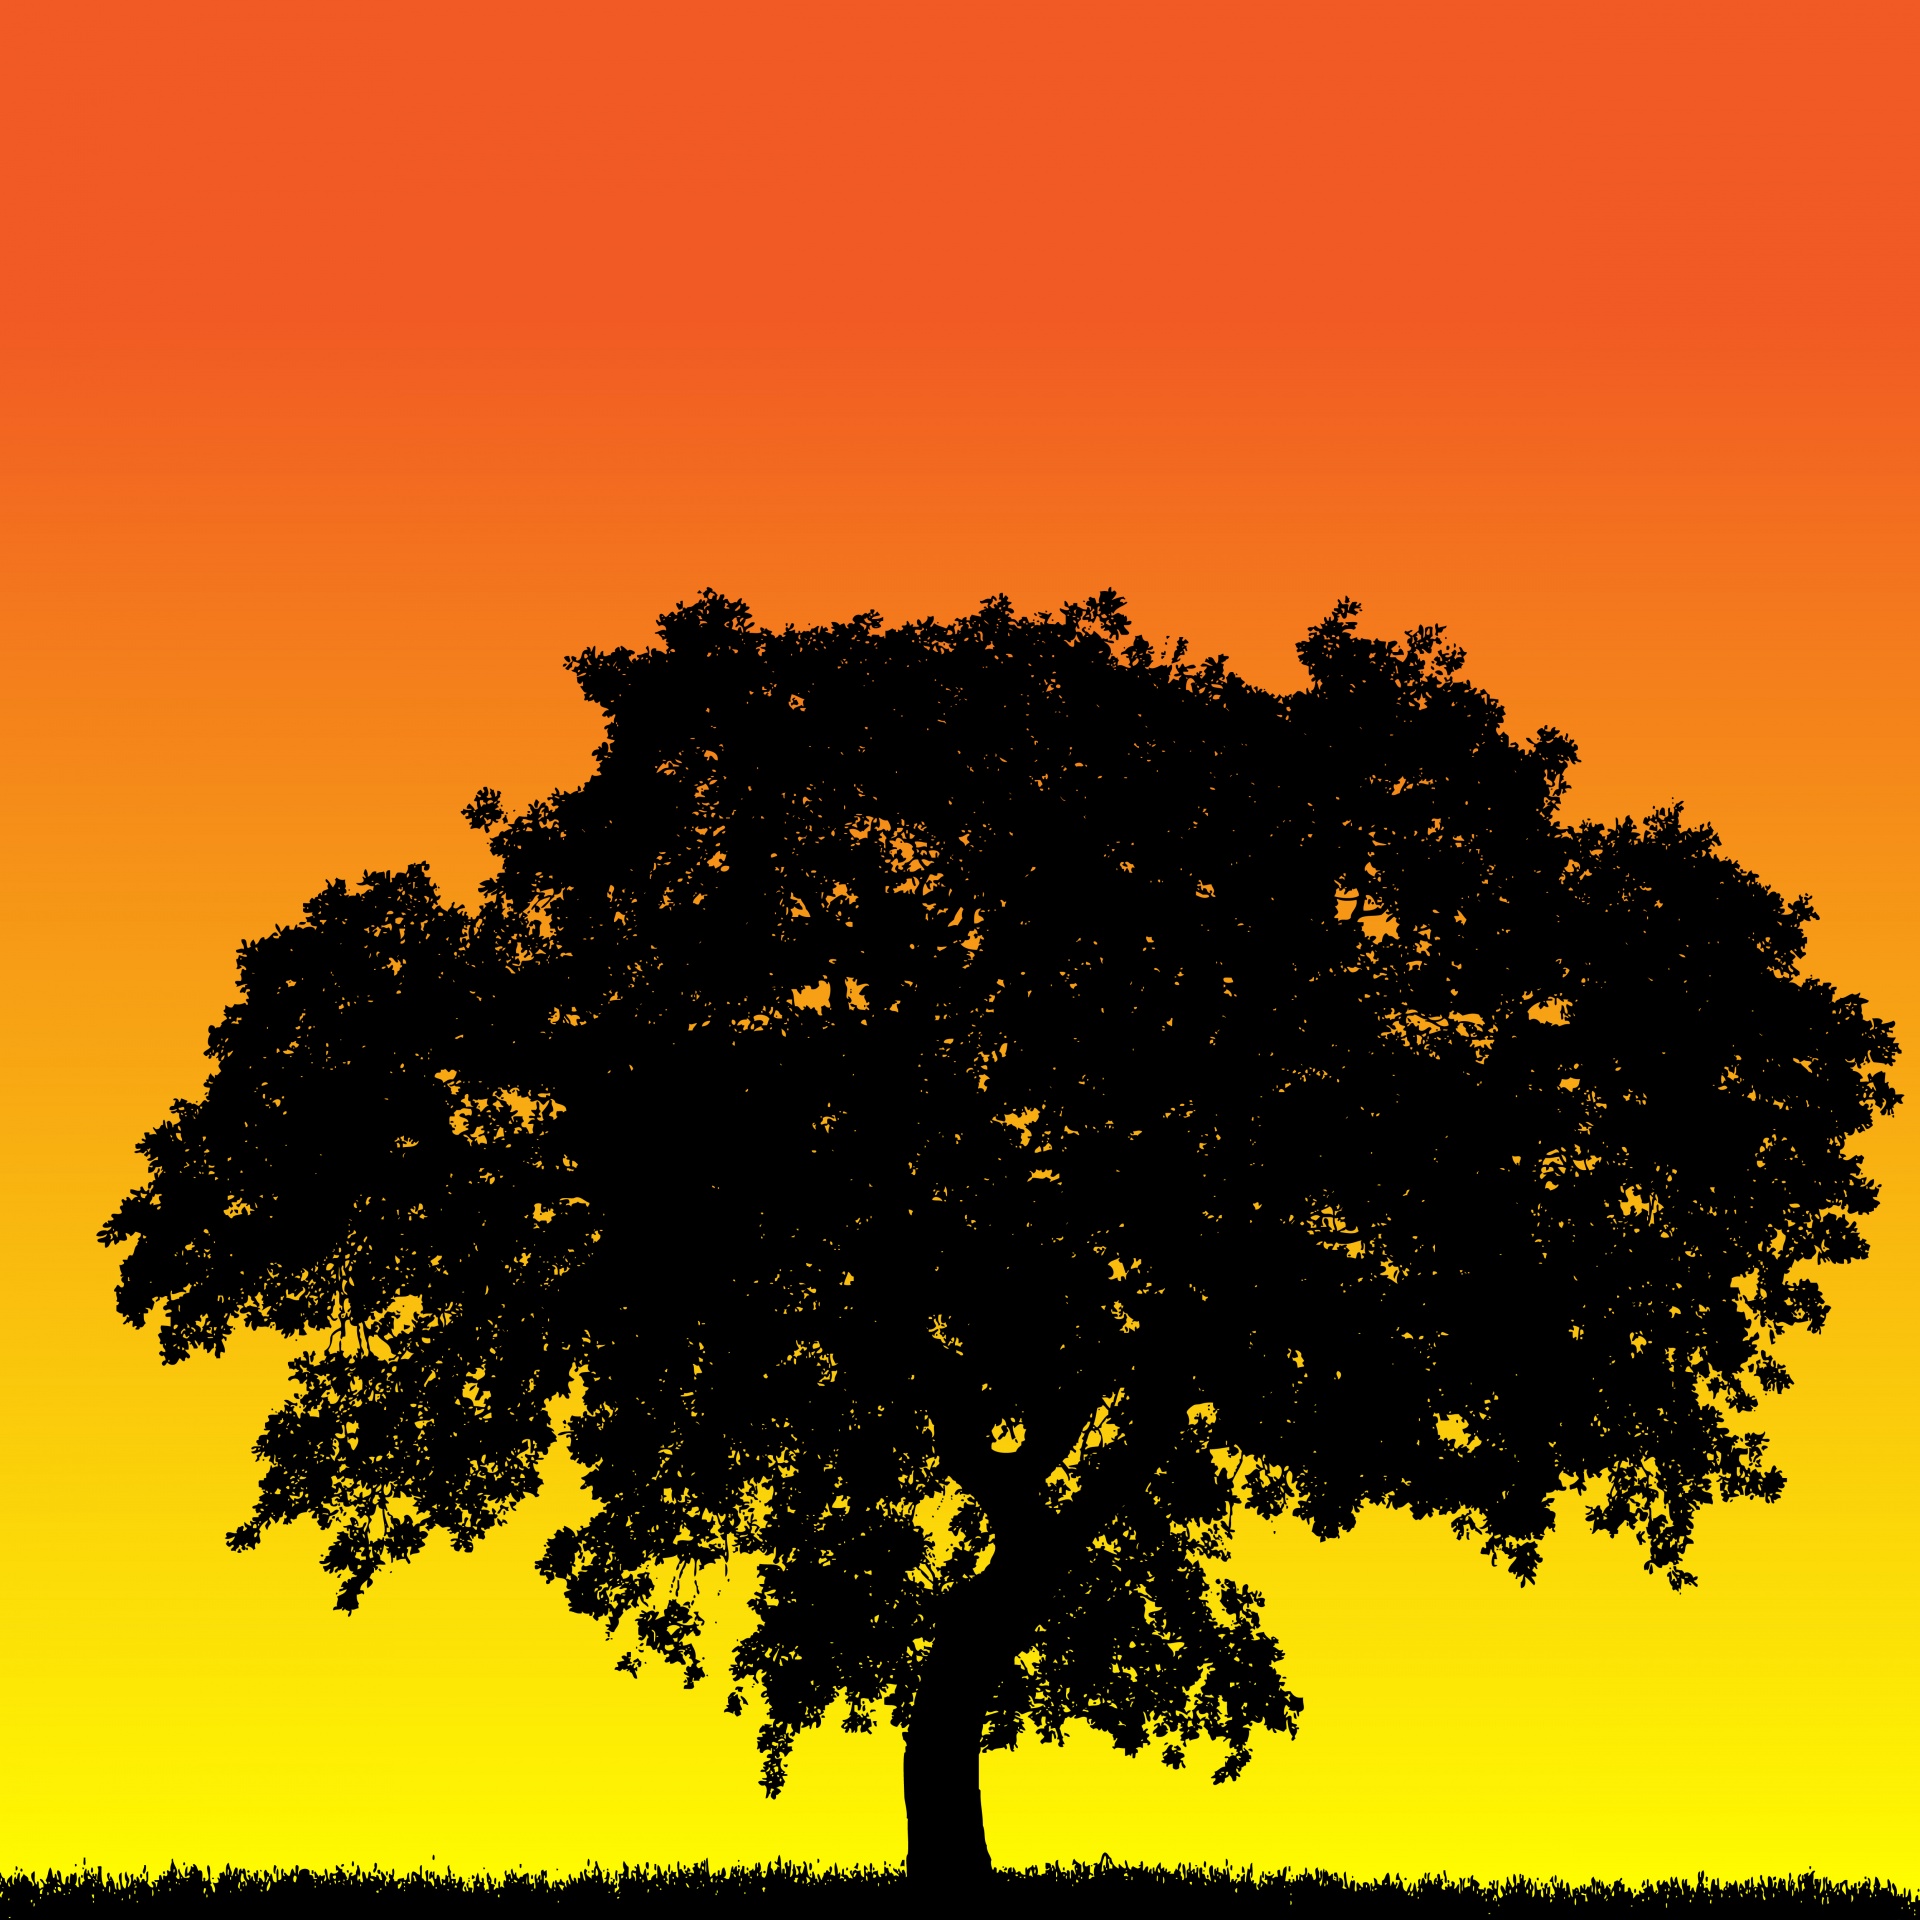 Oak tree silhouette at sunset against yellow orange sky background